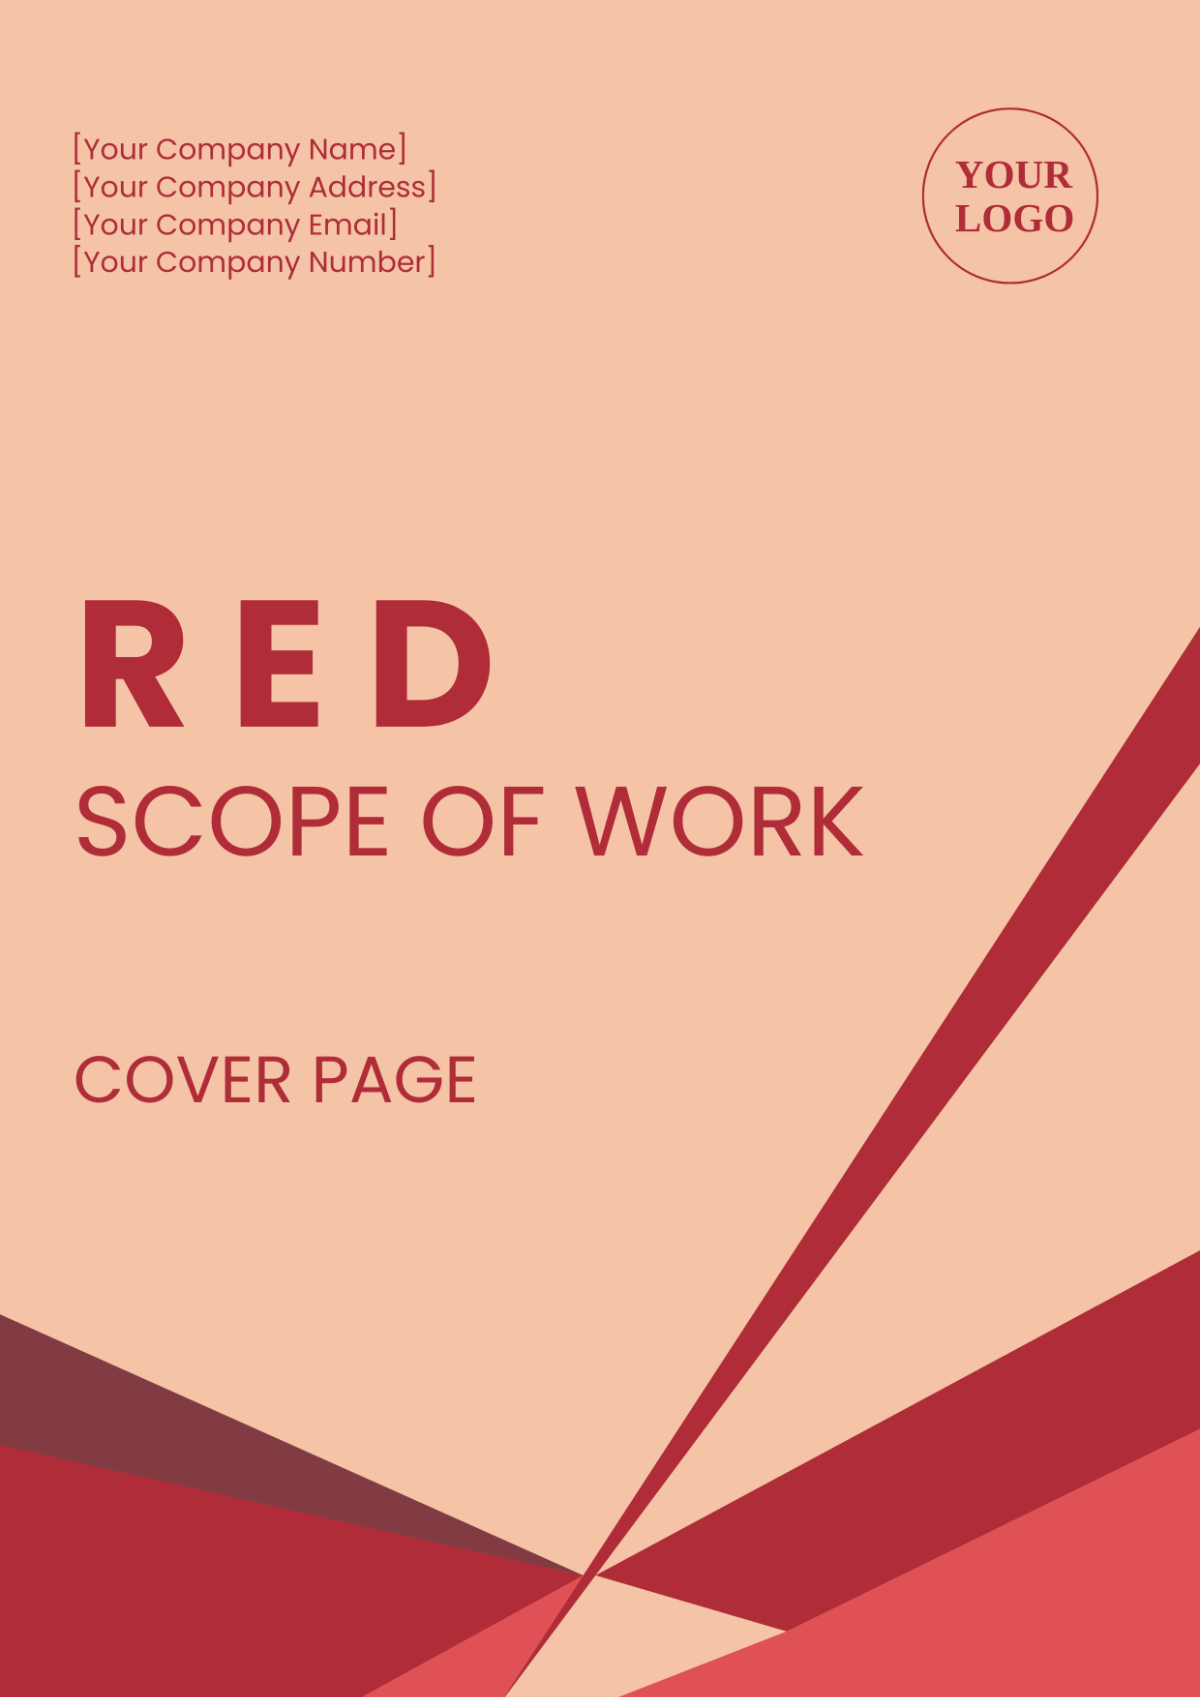 Red Scope of Work Cover Page